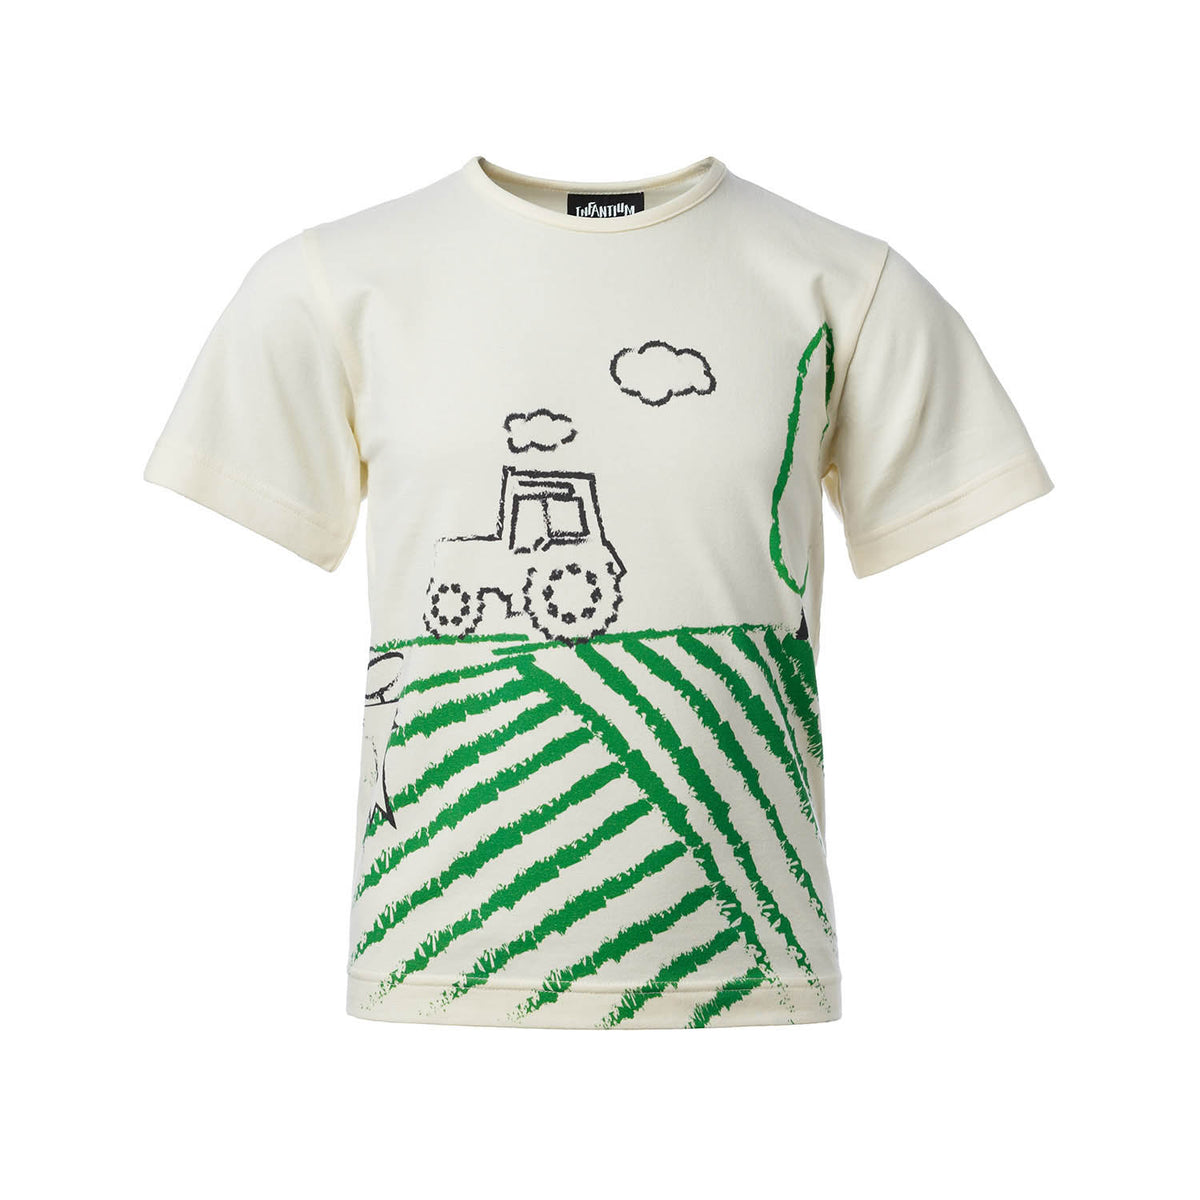 Off-White Short Sleeve T-Shirt with Tractor Print - Infantium Victoria